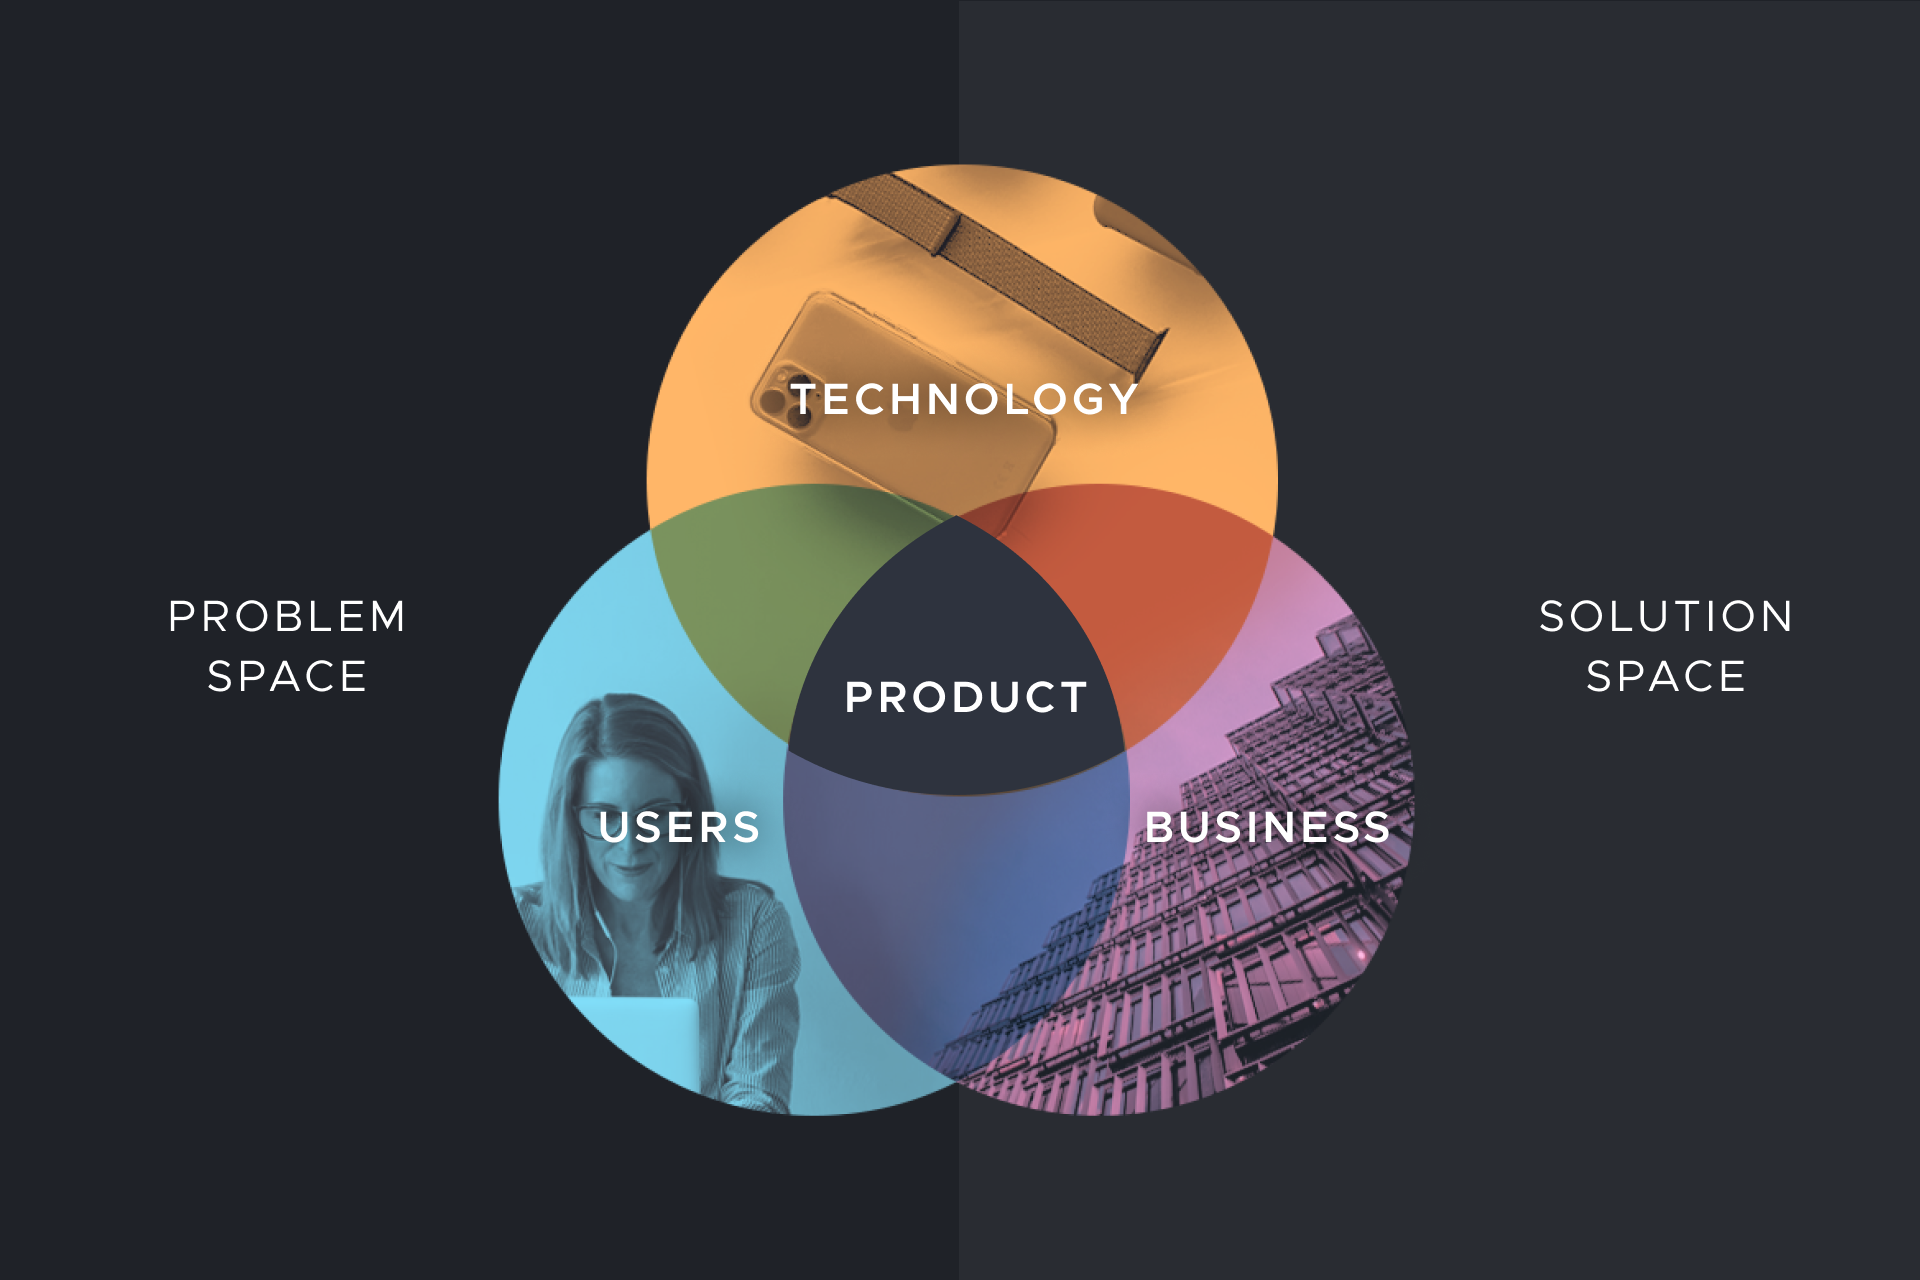 The Product Venn Diagram of overlapping users, business and technology.